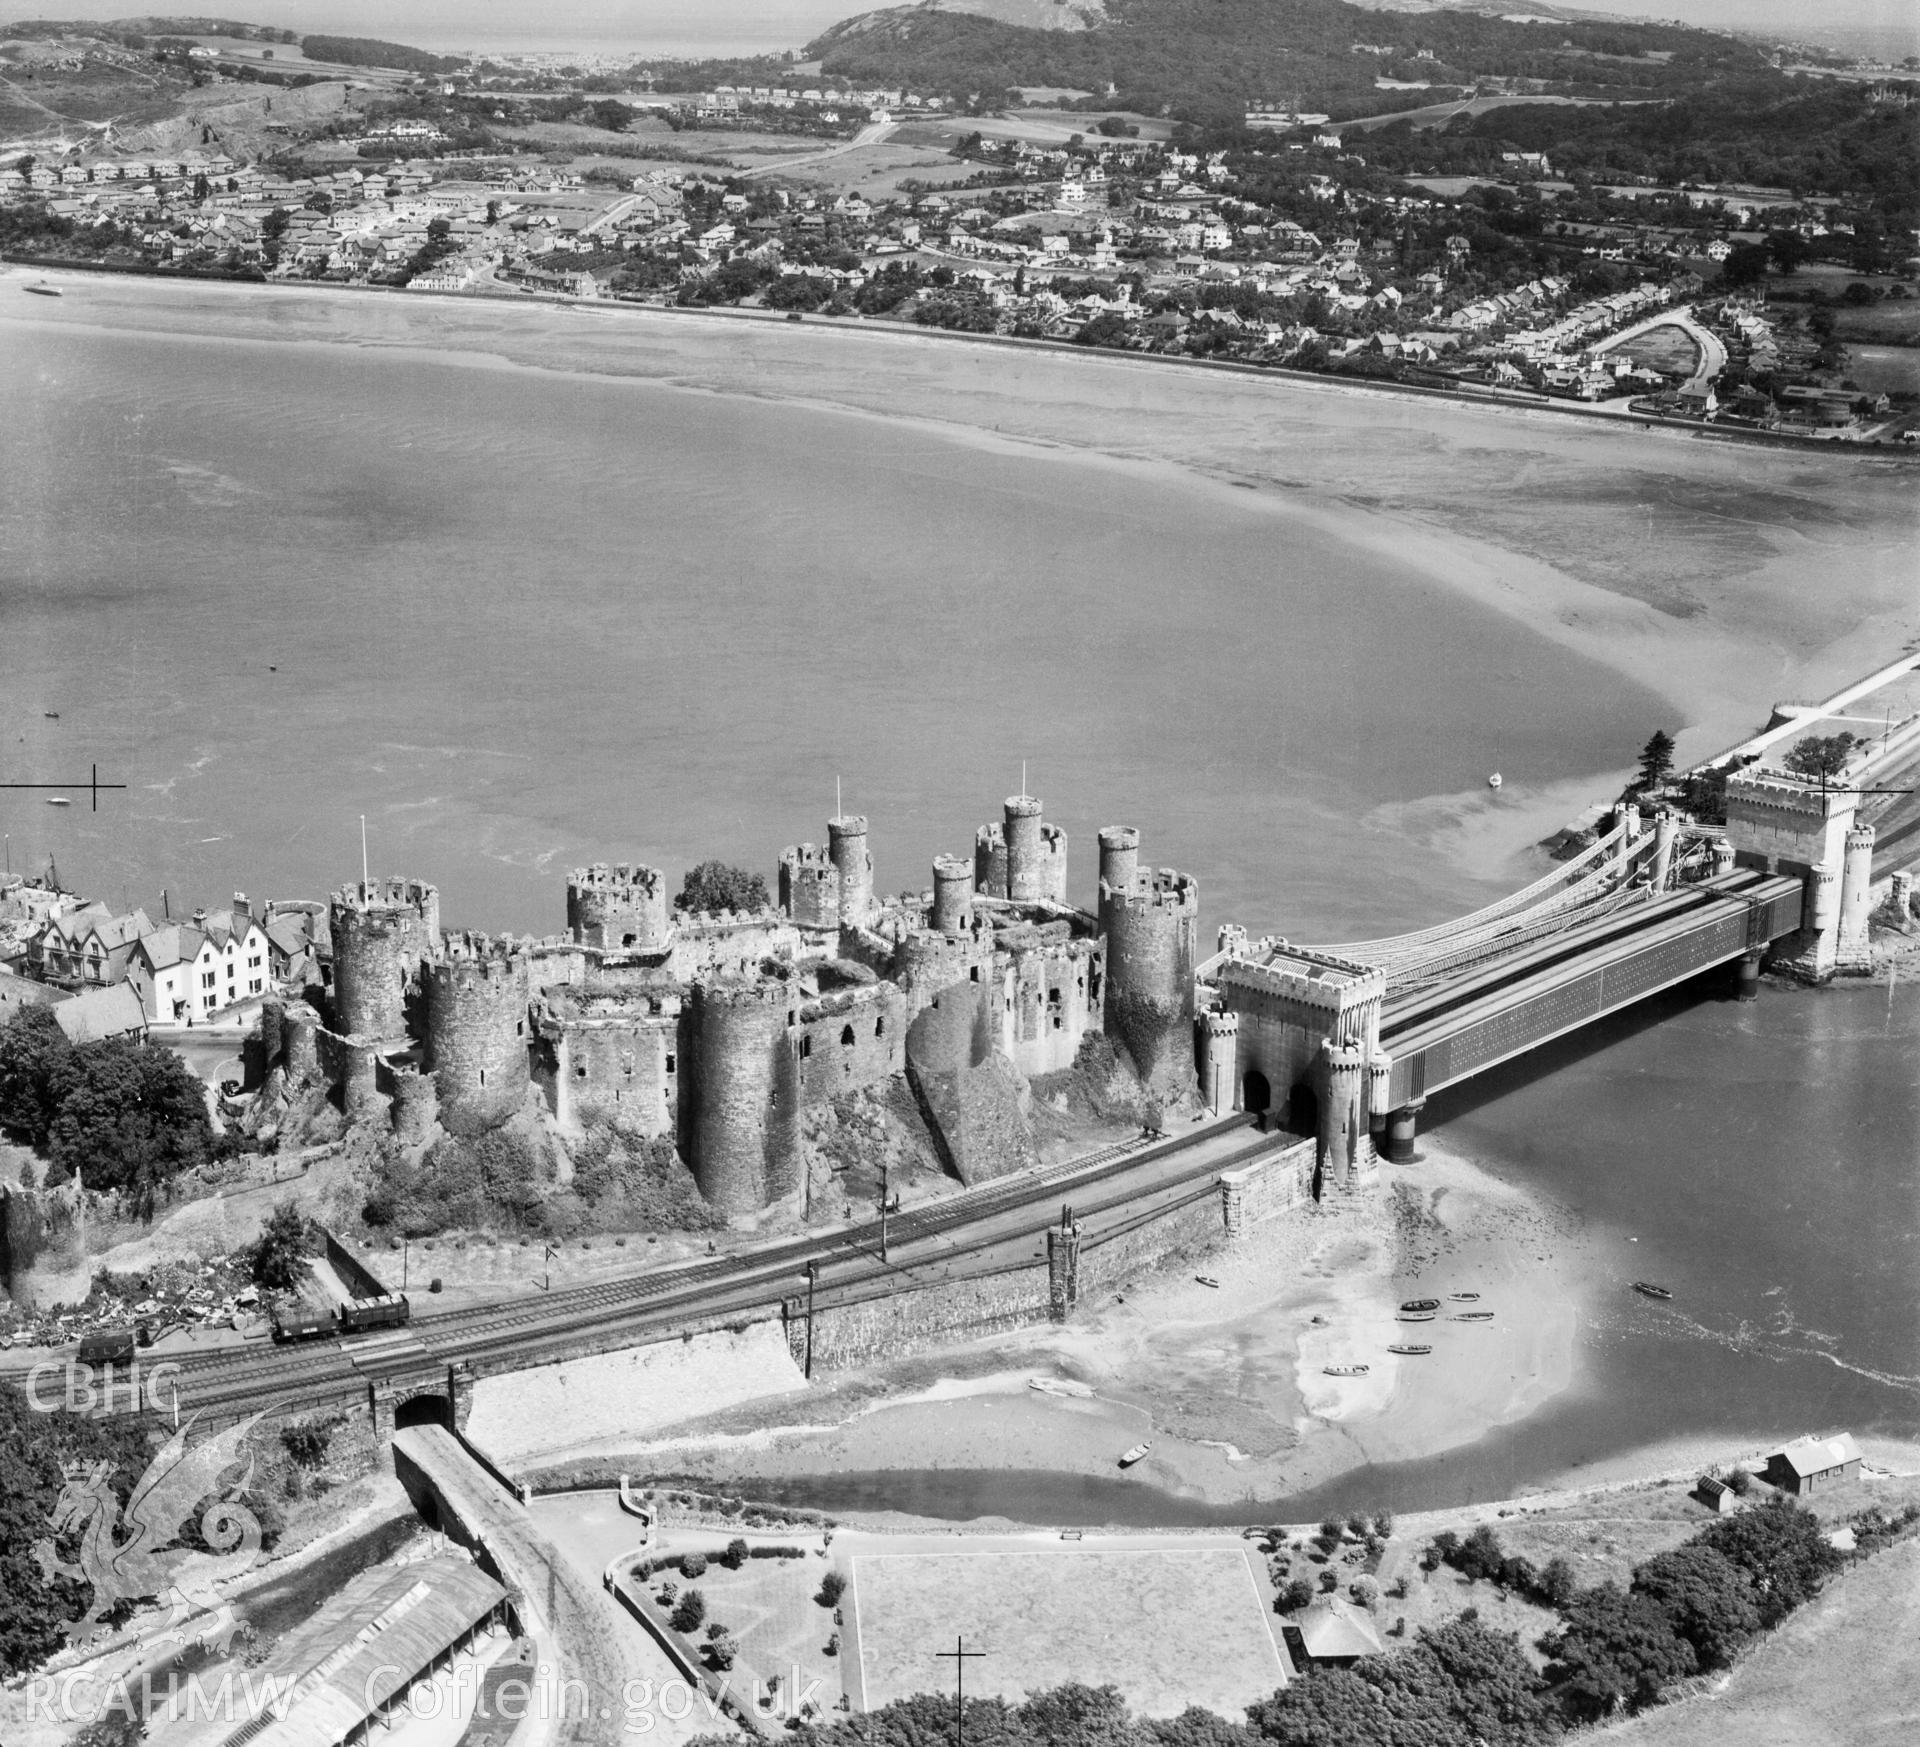 View of Conwy showing castle